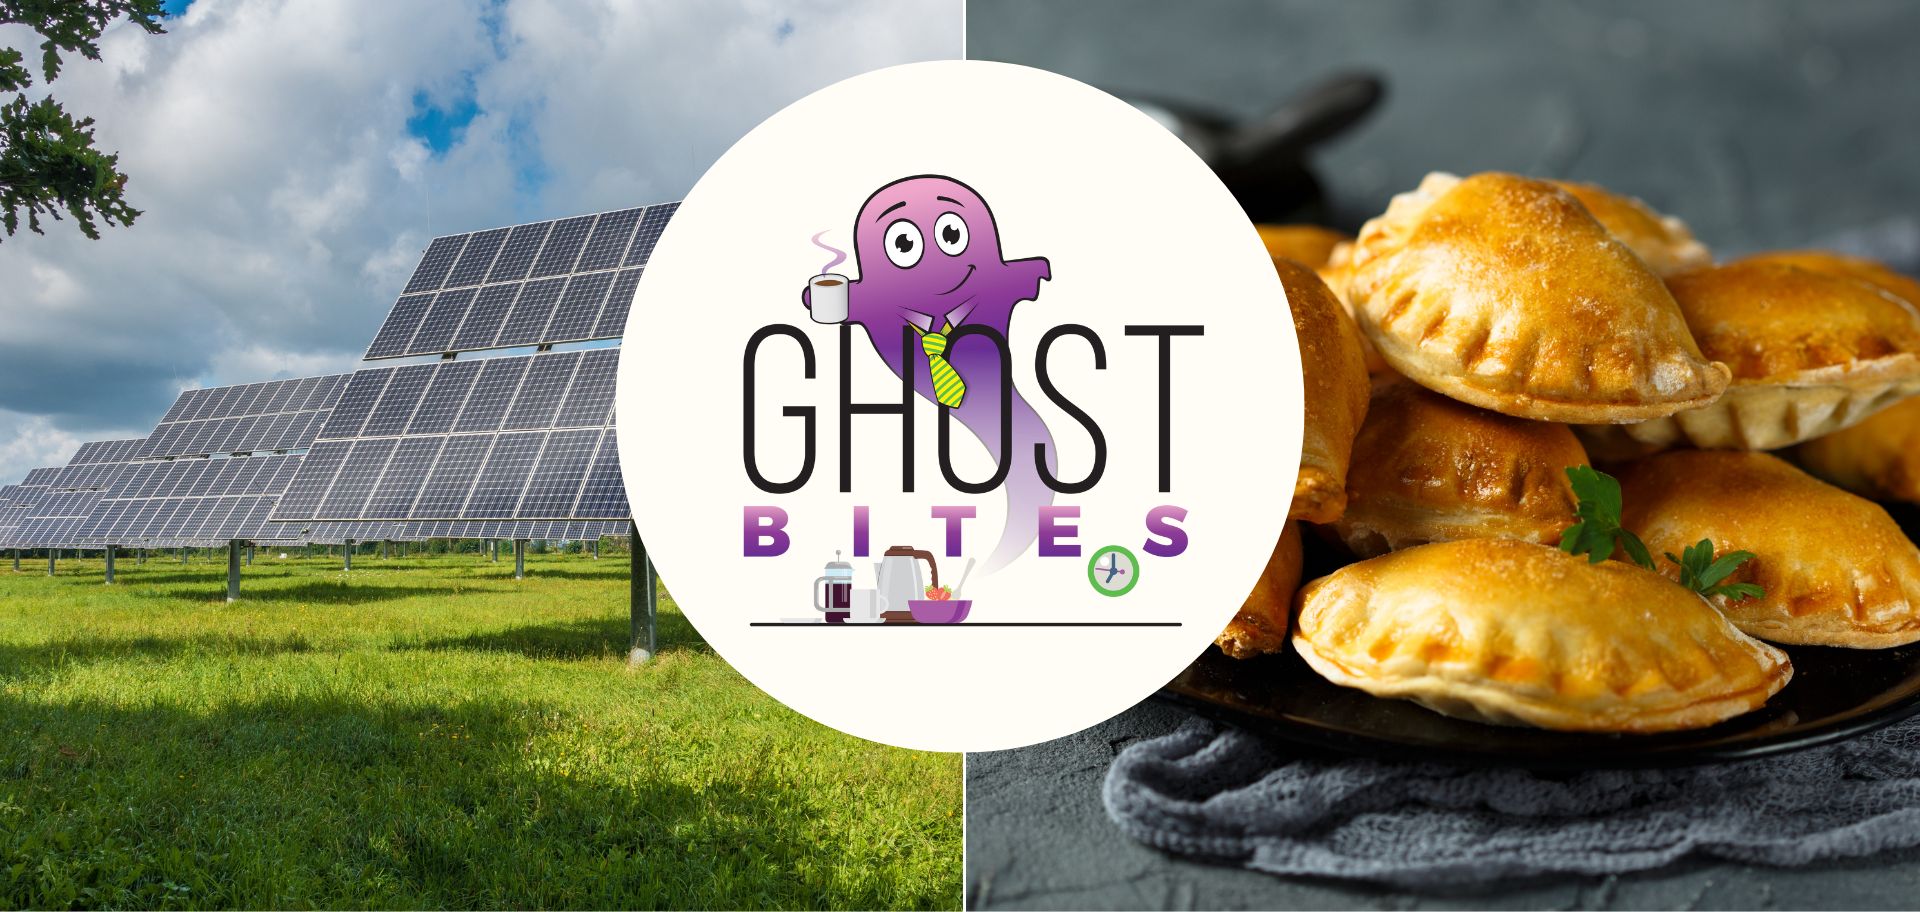 Ghost Bites (Burstone | Growthpoint | Old Mutual | Pan African Resources | Primeserv | Reunert | RFG Holdings | Textainer)